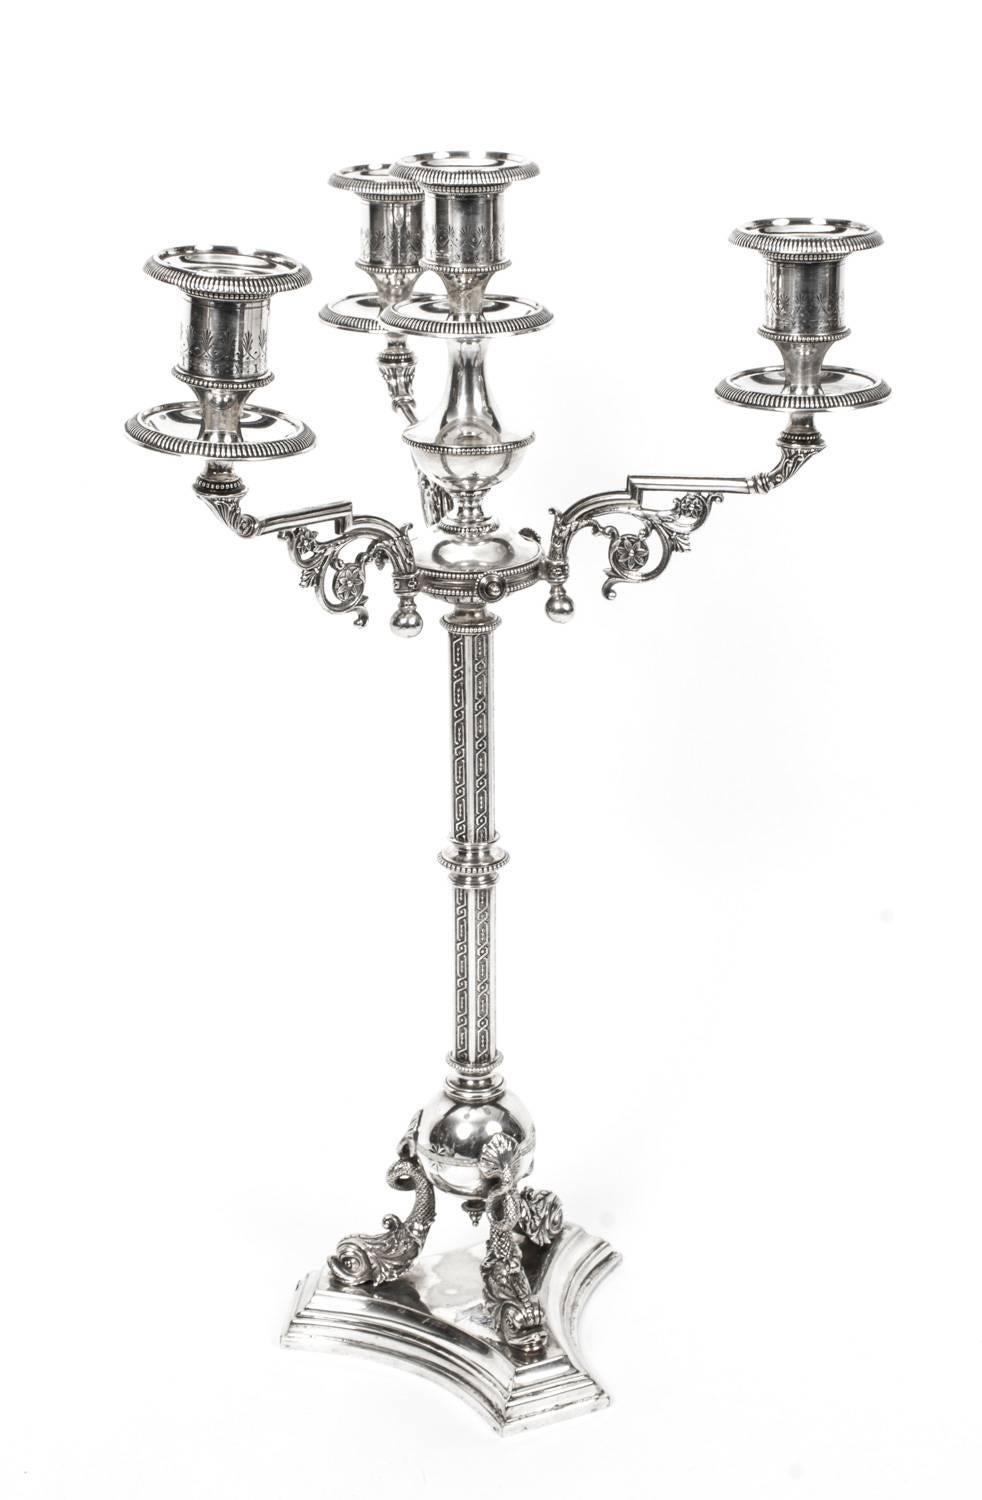 This is a stunning pair of antique Victorian silver plated, four light, three-branch table candelabra, circa 1880 in date, and bearing the mark of the renowned silversmiths Horace Woodward & Co, of Birmingham England.

The candelabra feature